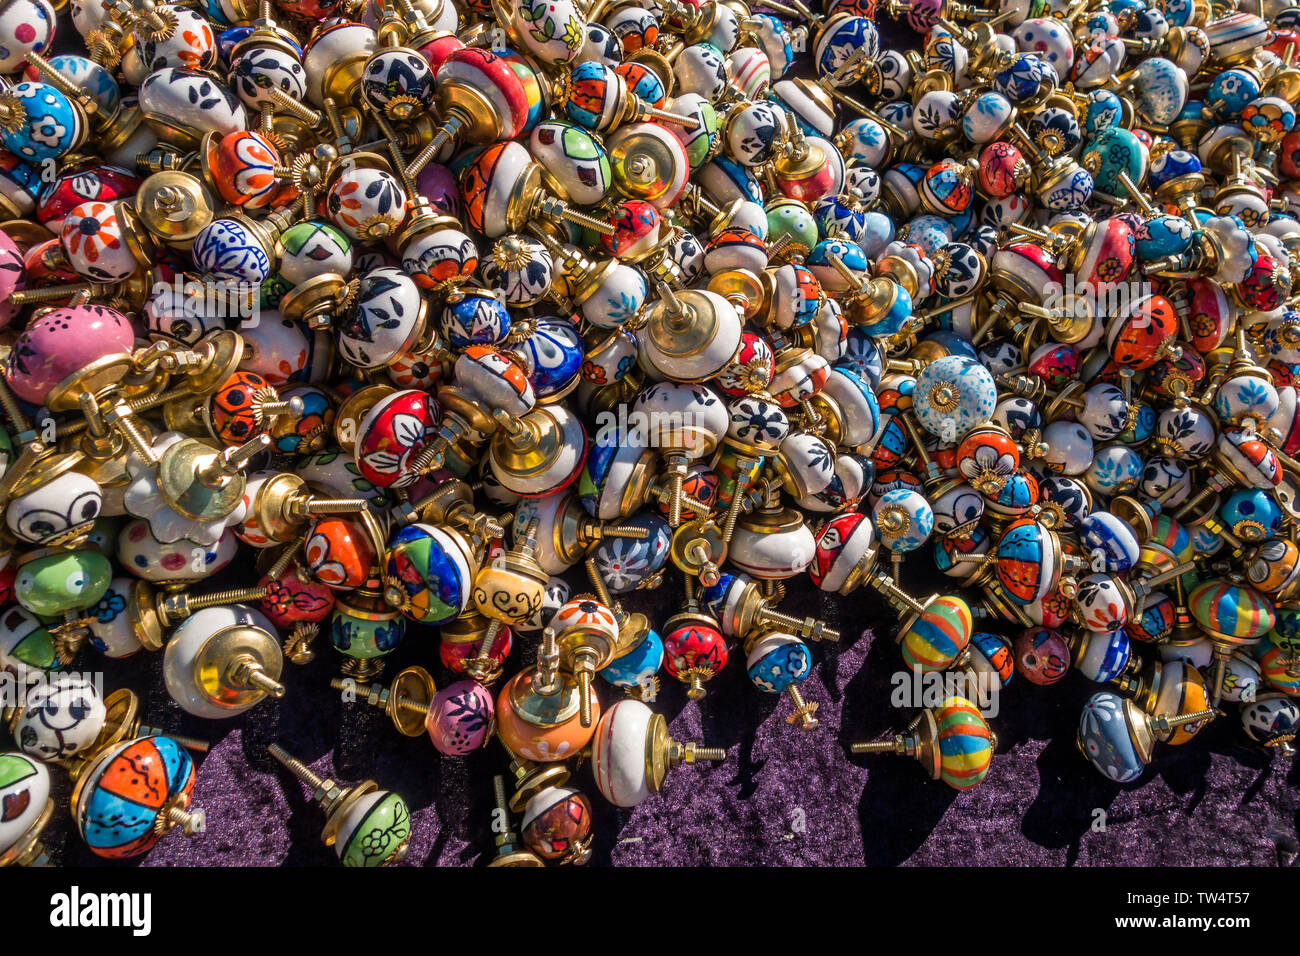 Chamonix, France - 23 March 2019: Hundreds of artisan colourful porcelain and brass doorknobs spread out on display for sale on a market stall table a Stock Photo